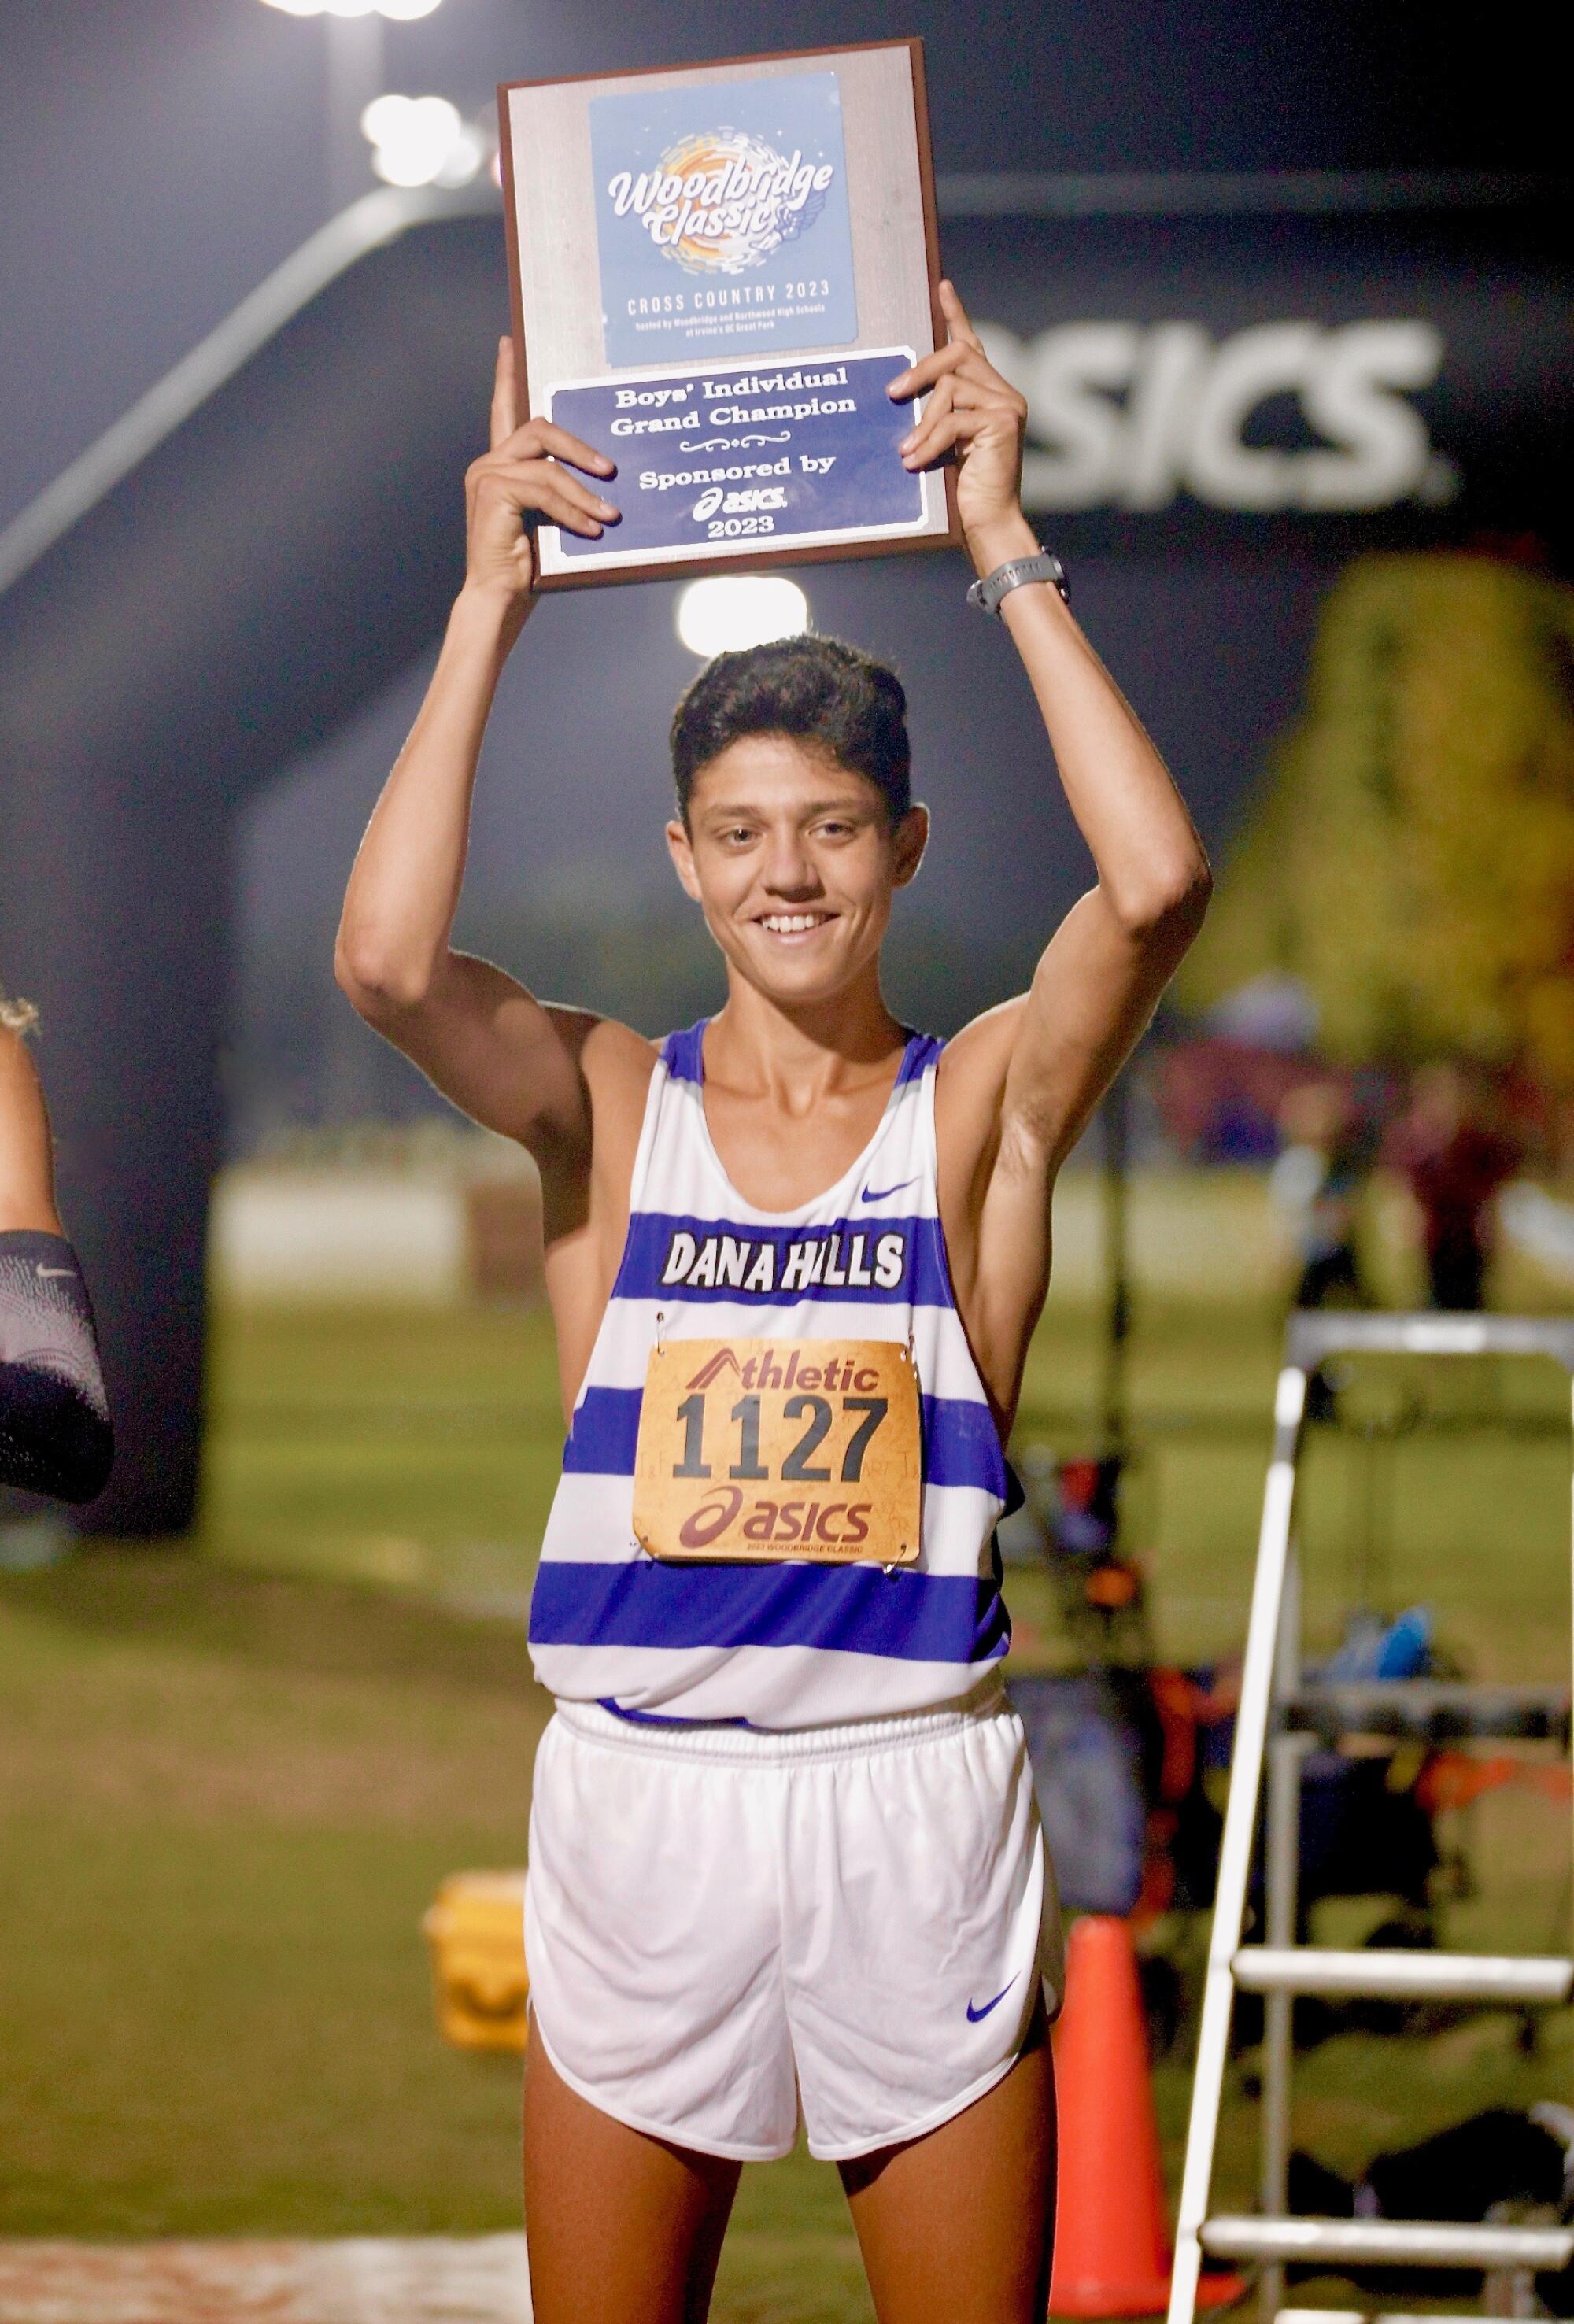 Dana Hills' Evan Noonan holds aloft the first-place plaque after winning the boys' sweepstakes race at Woodbridge Classic.